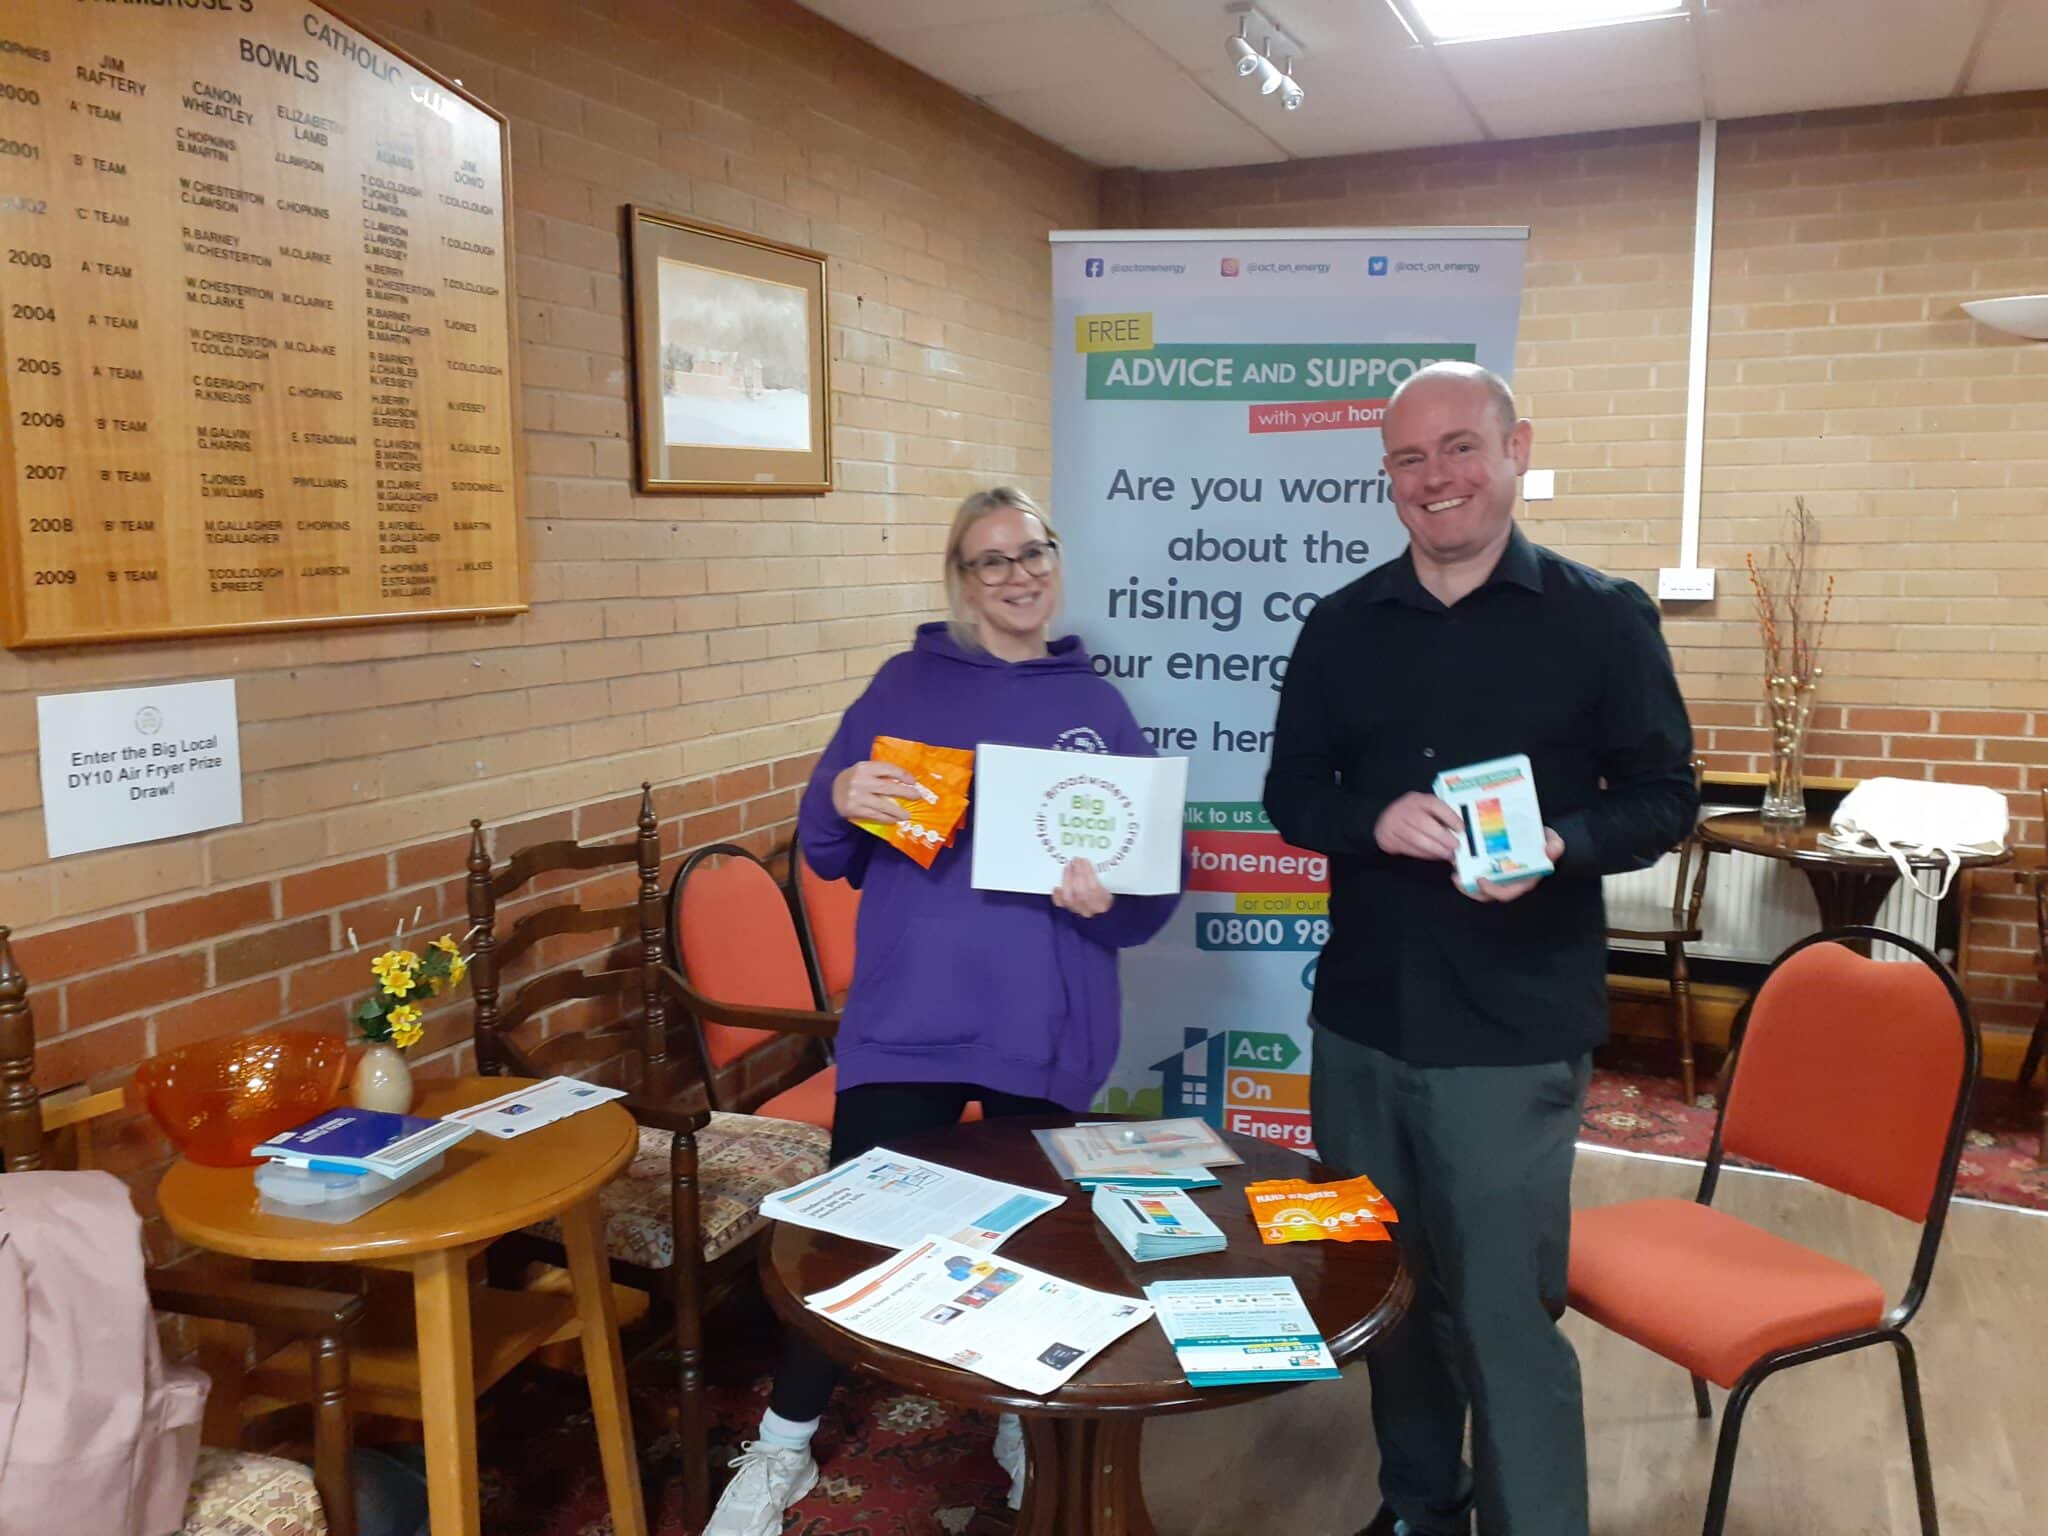 Paul, Advisor at Act on Energy, and Anna, Project support worker at DY10, at a local swap shop event (Photo: DY10 Big Local)